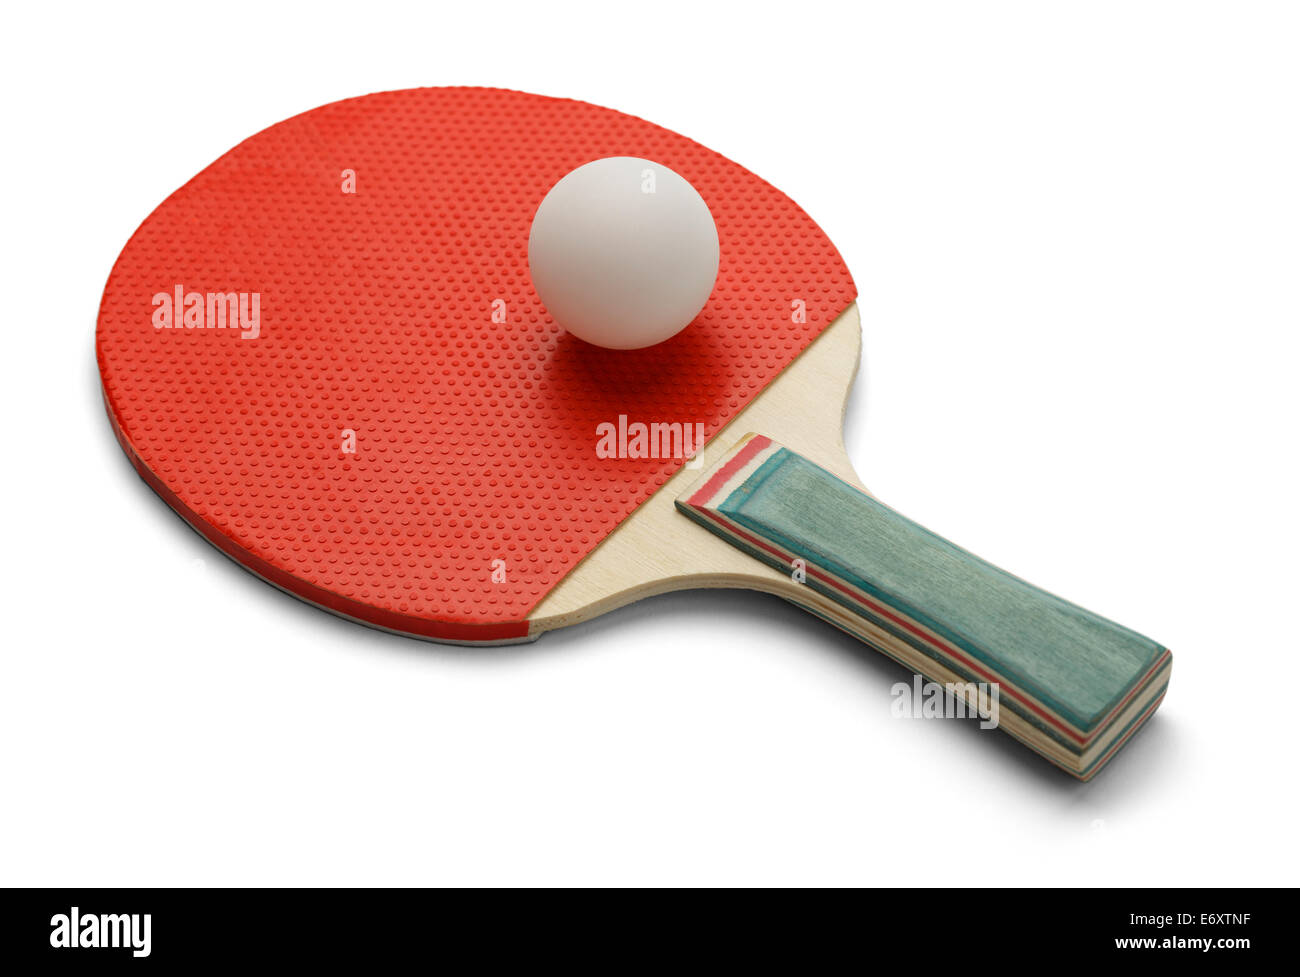 Ping-Pong Paddel und Ping-Pong-Ball Isolated on White Background. Stockfoto